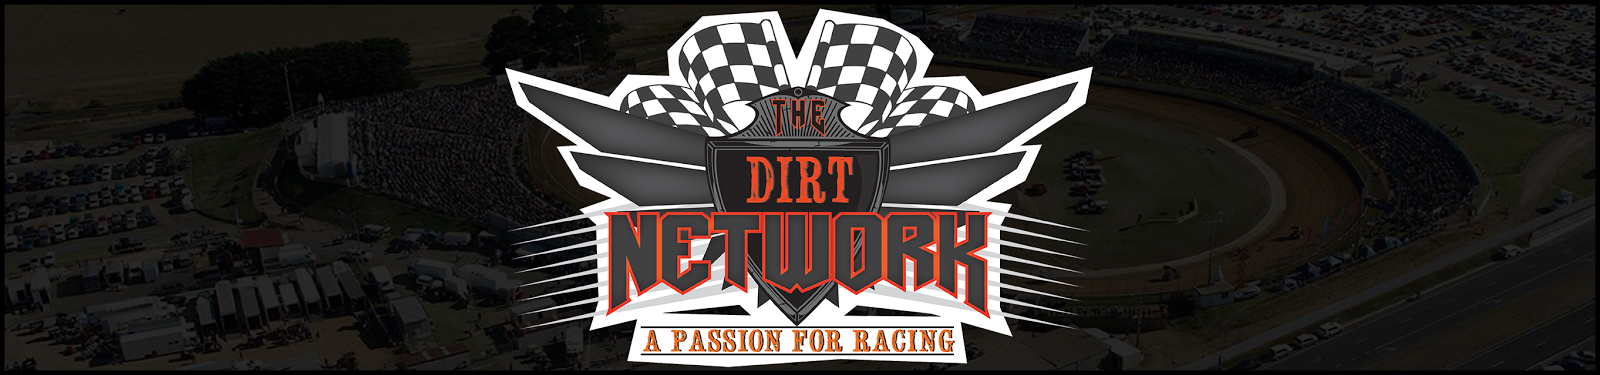 The DIRT Network